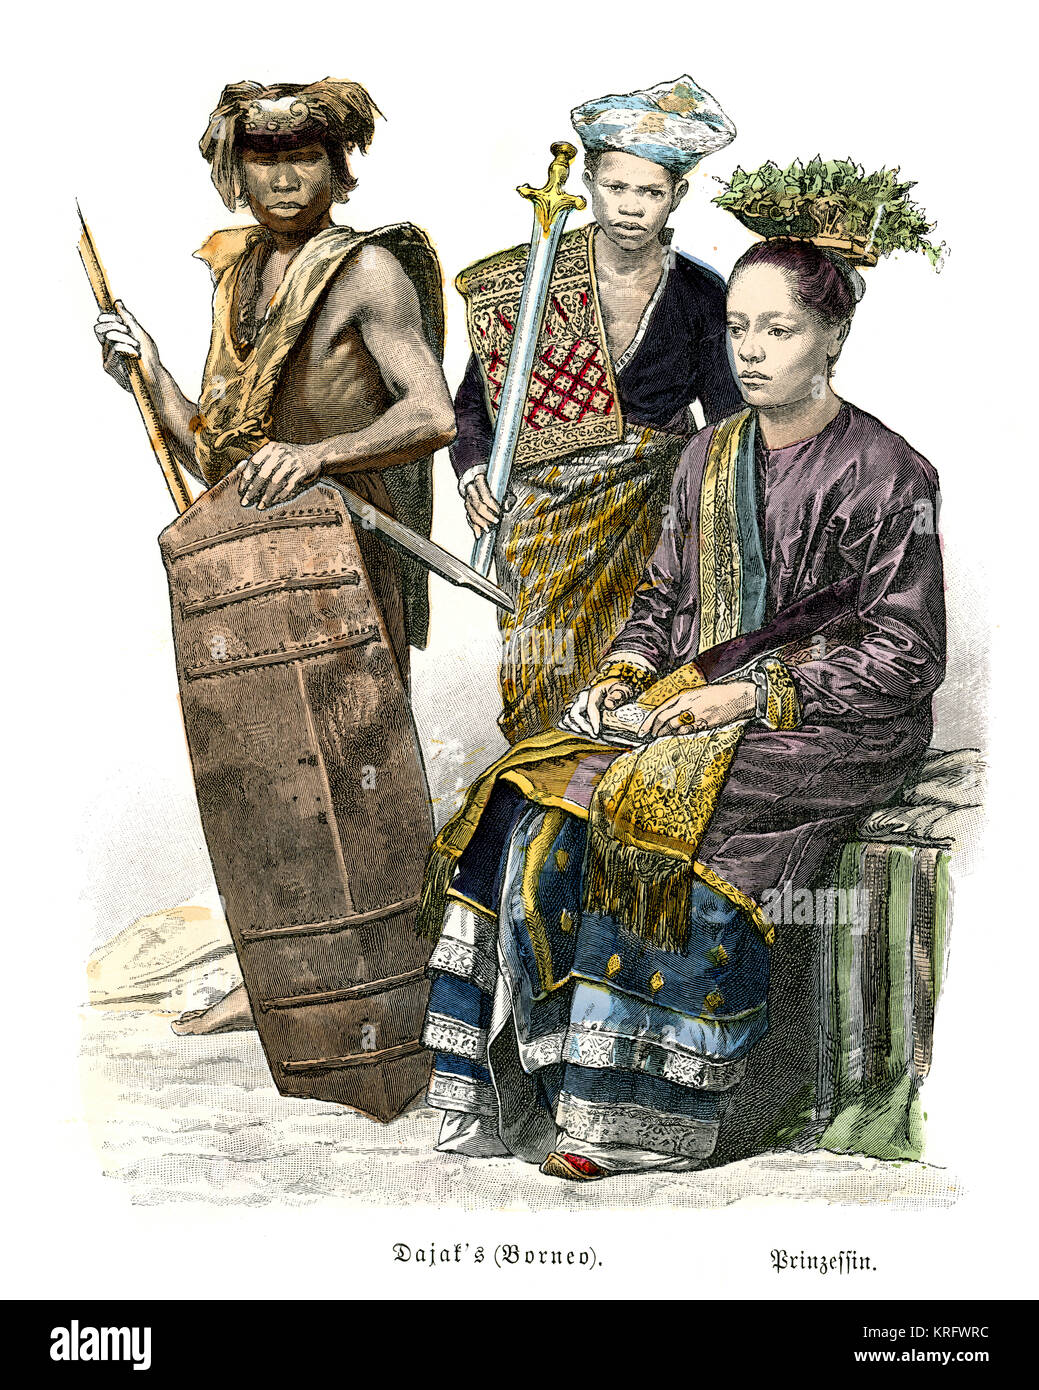 Vintage engraving of Dajak, Borneo, Indonesia, 19th Century. Warrior and woman Stock Photo